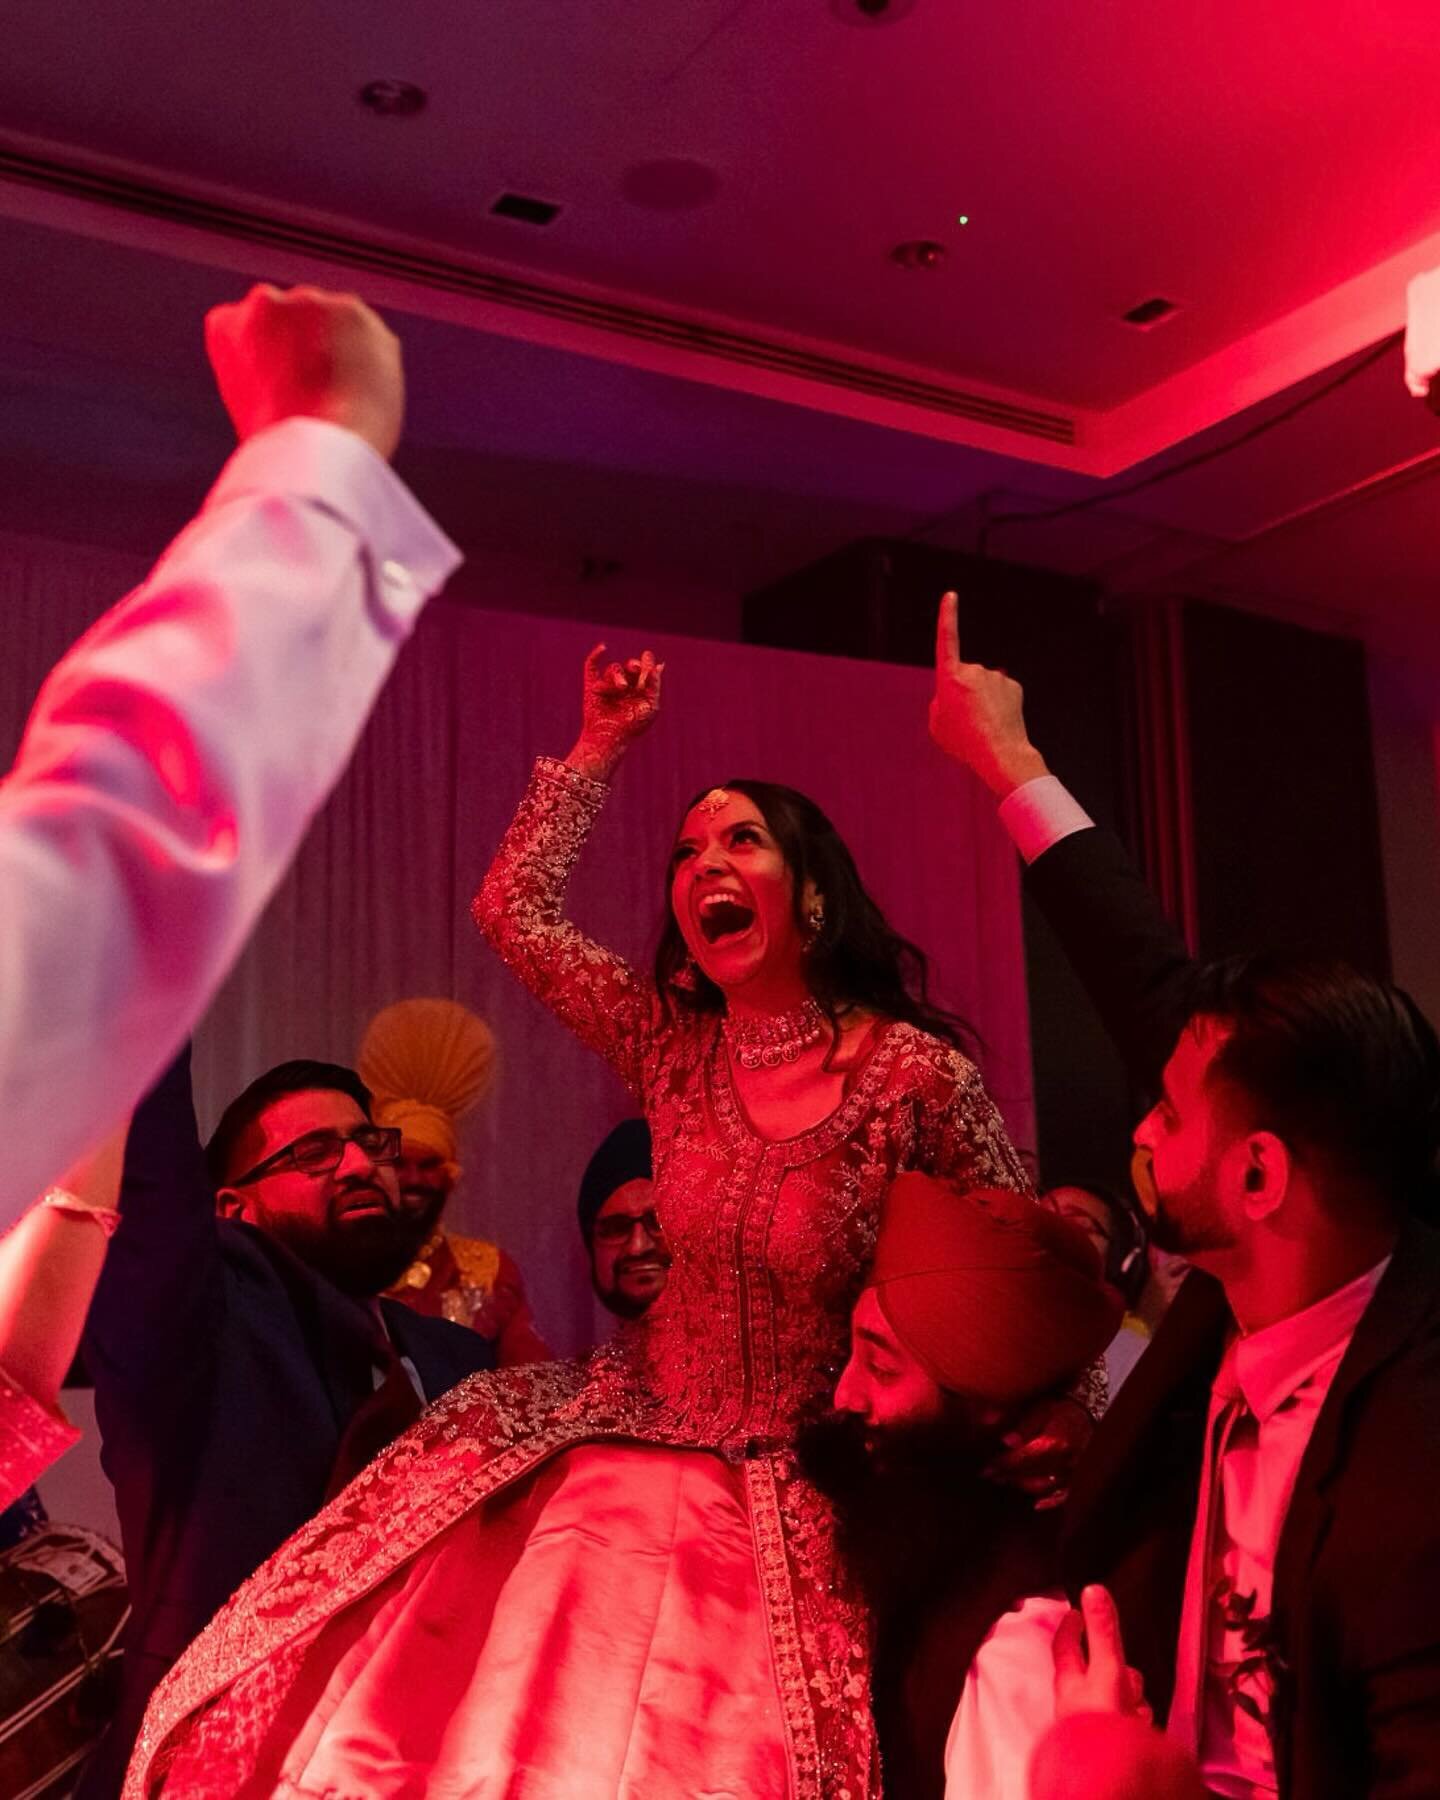 Jas and Daniella&rsquo;s wedding at Hilton Syon Park was a fusion of Indian and Brazilian wedding culture and traditions. An absolutely amazing day that kicked off the 2024 wedding season with a bang, on the dance floor with an epic Bhangra dance tro